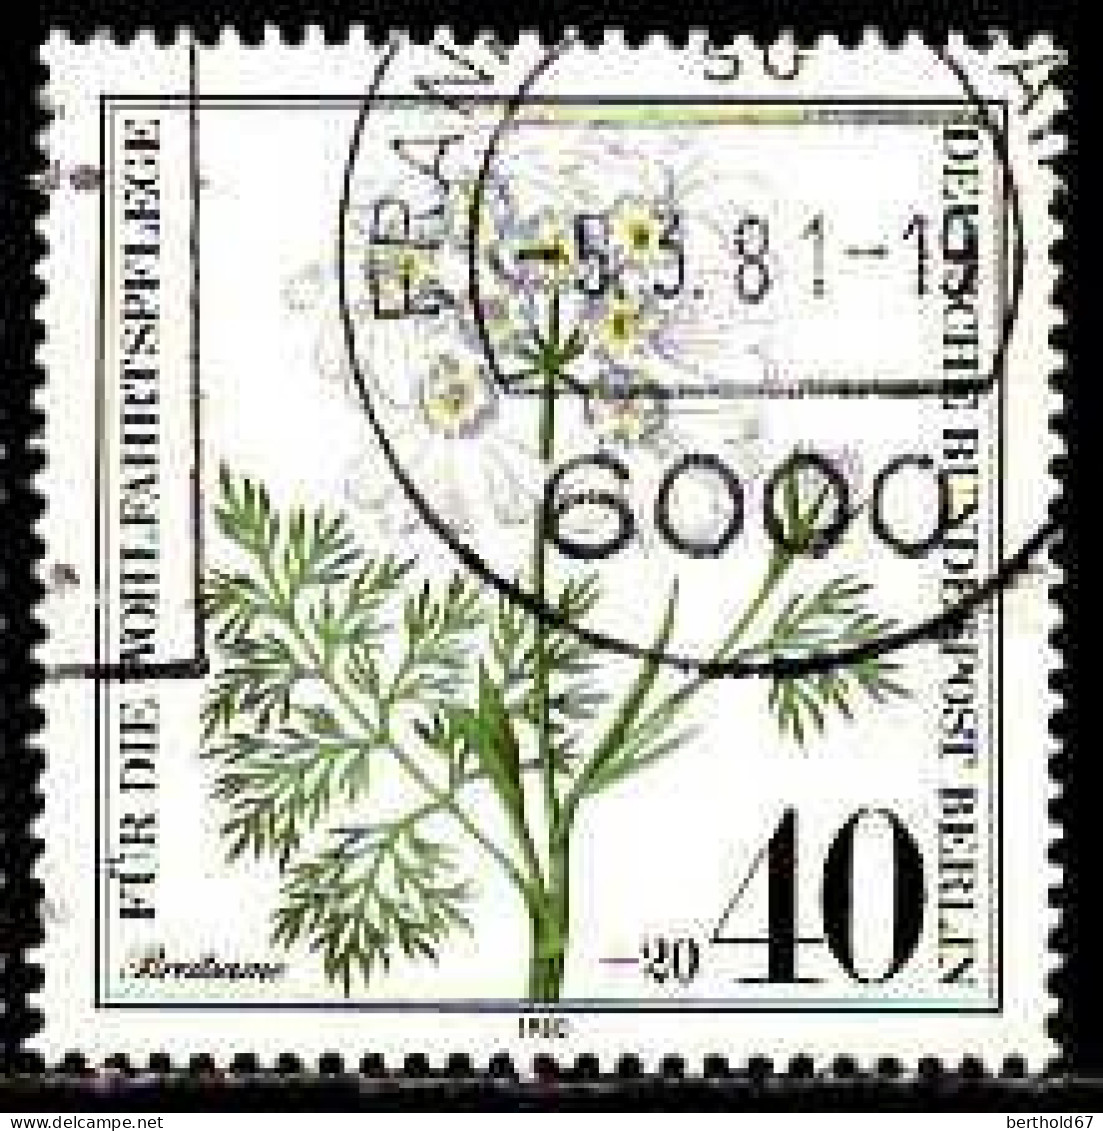 Berlin Poste Obl Yv:590/593 Bienfaisance Herbes Des Champs (TB Cachet Rond) - Used Stamps